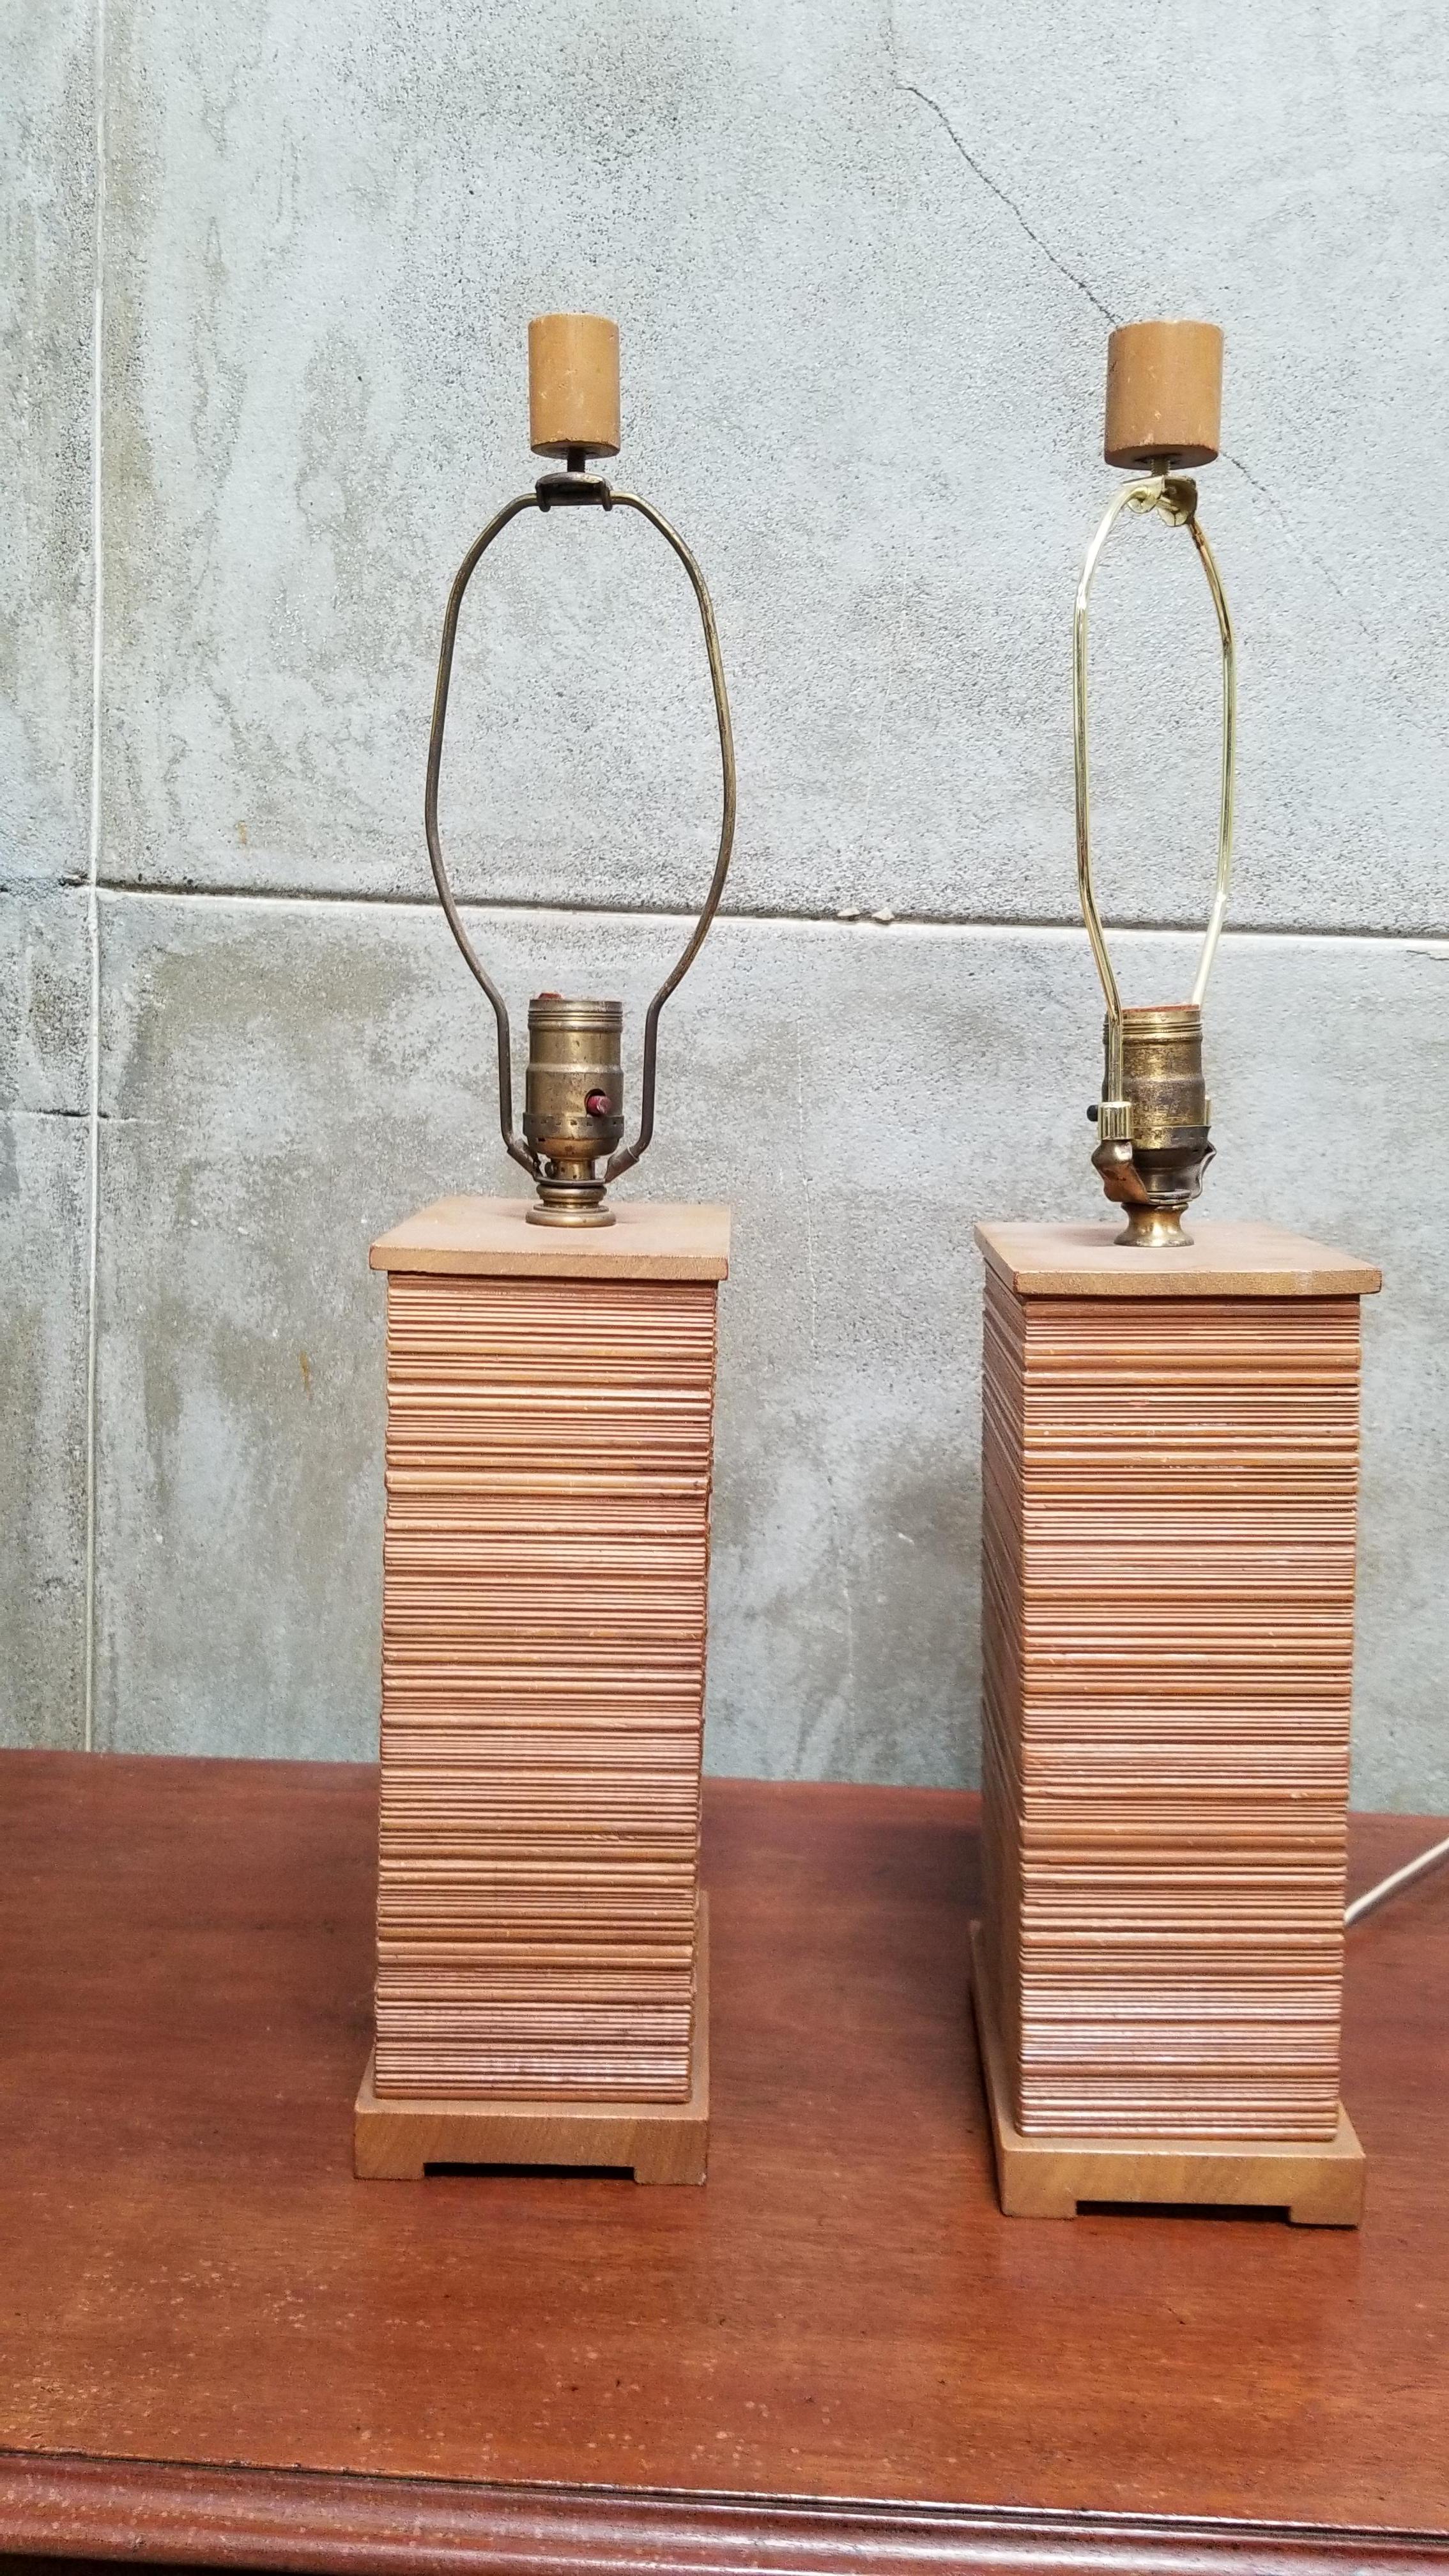 Paul Frankl Combed Fir Table Lamps, a Pair In Good Condition For Sale In Fulton, CA